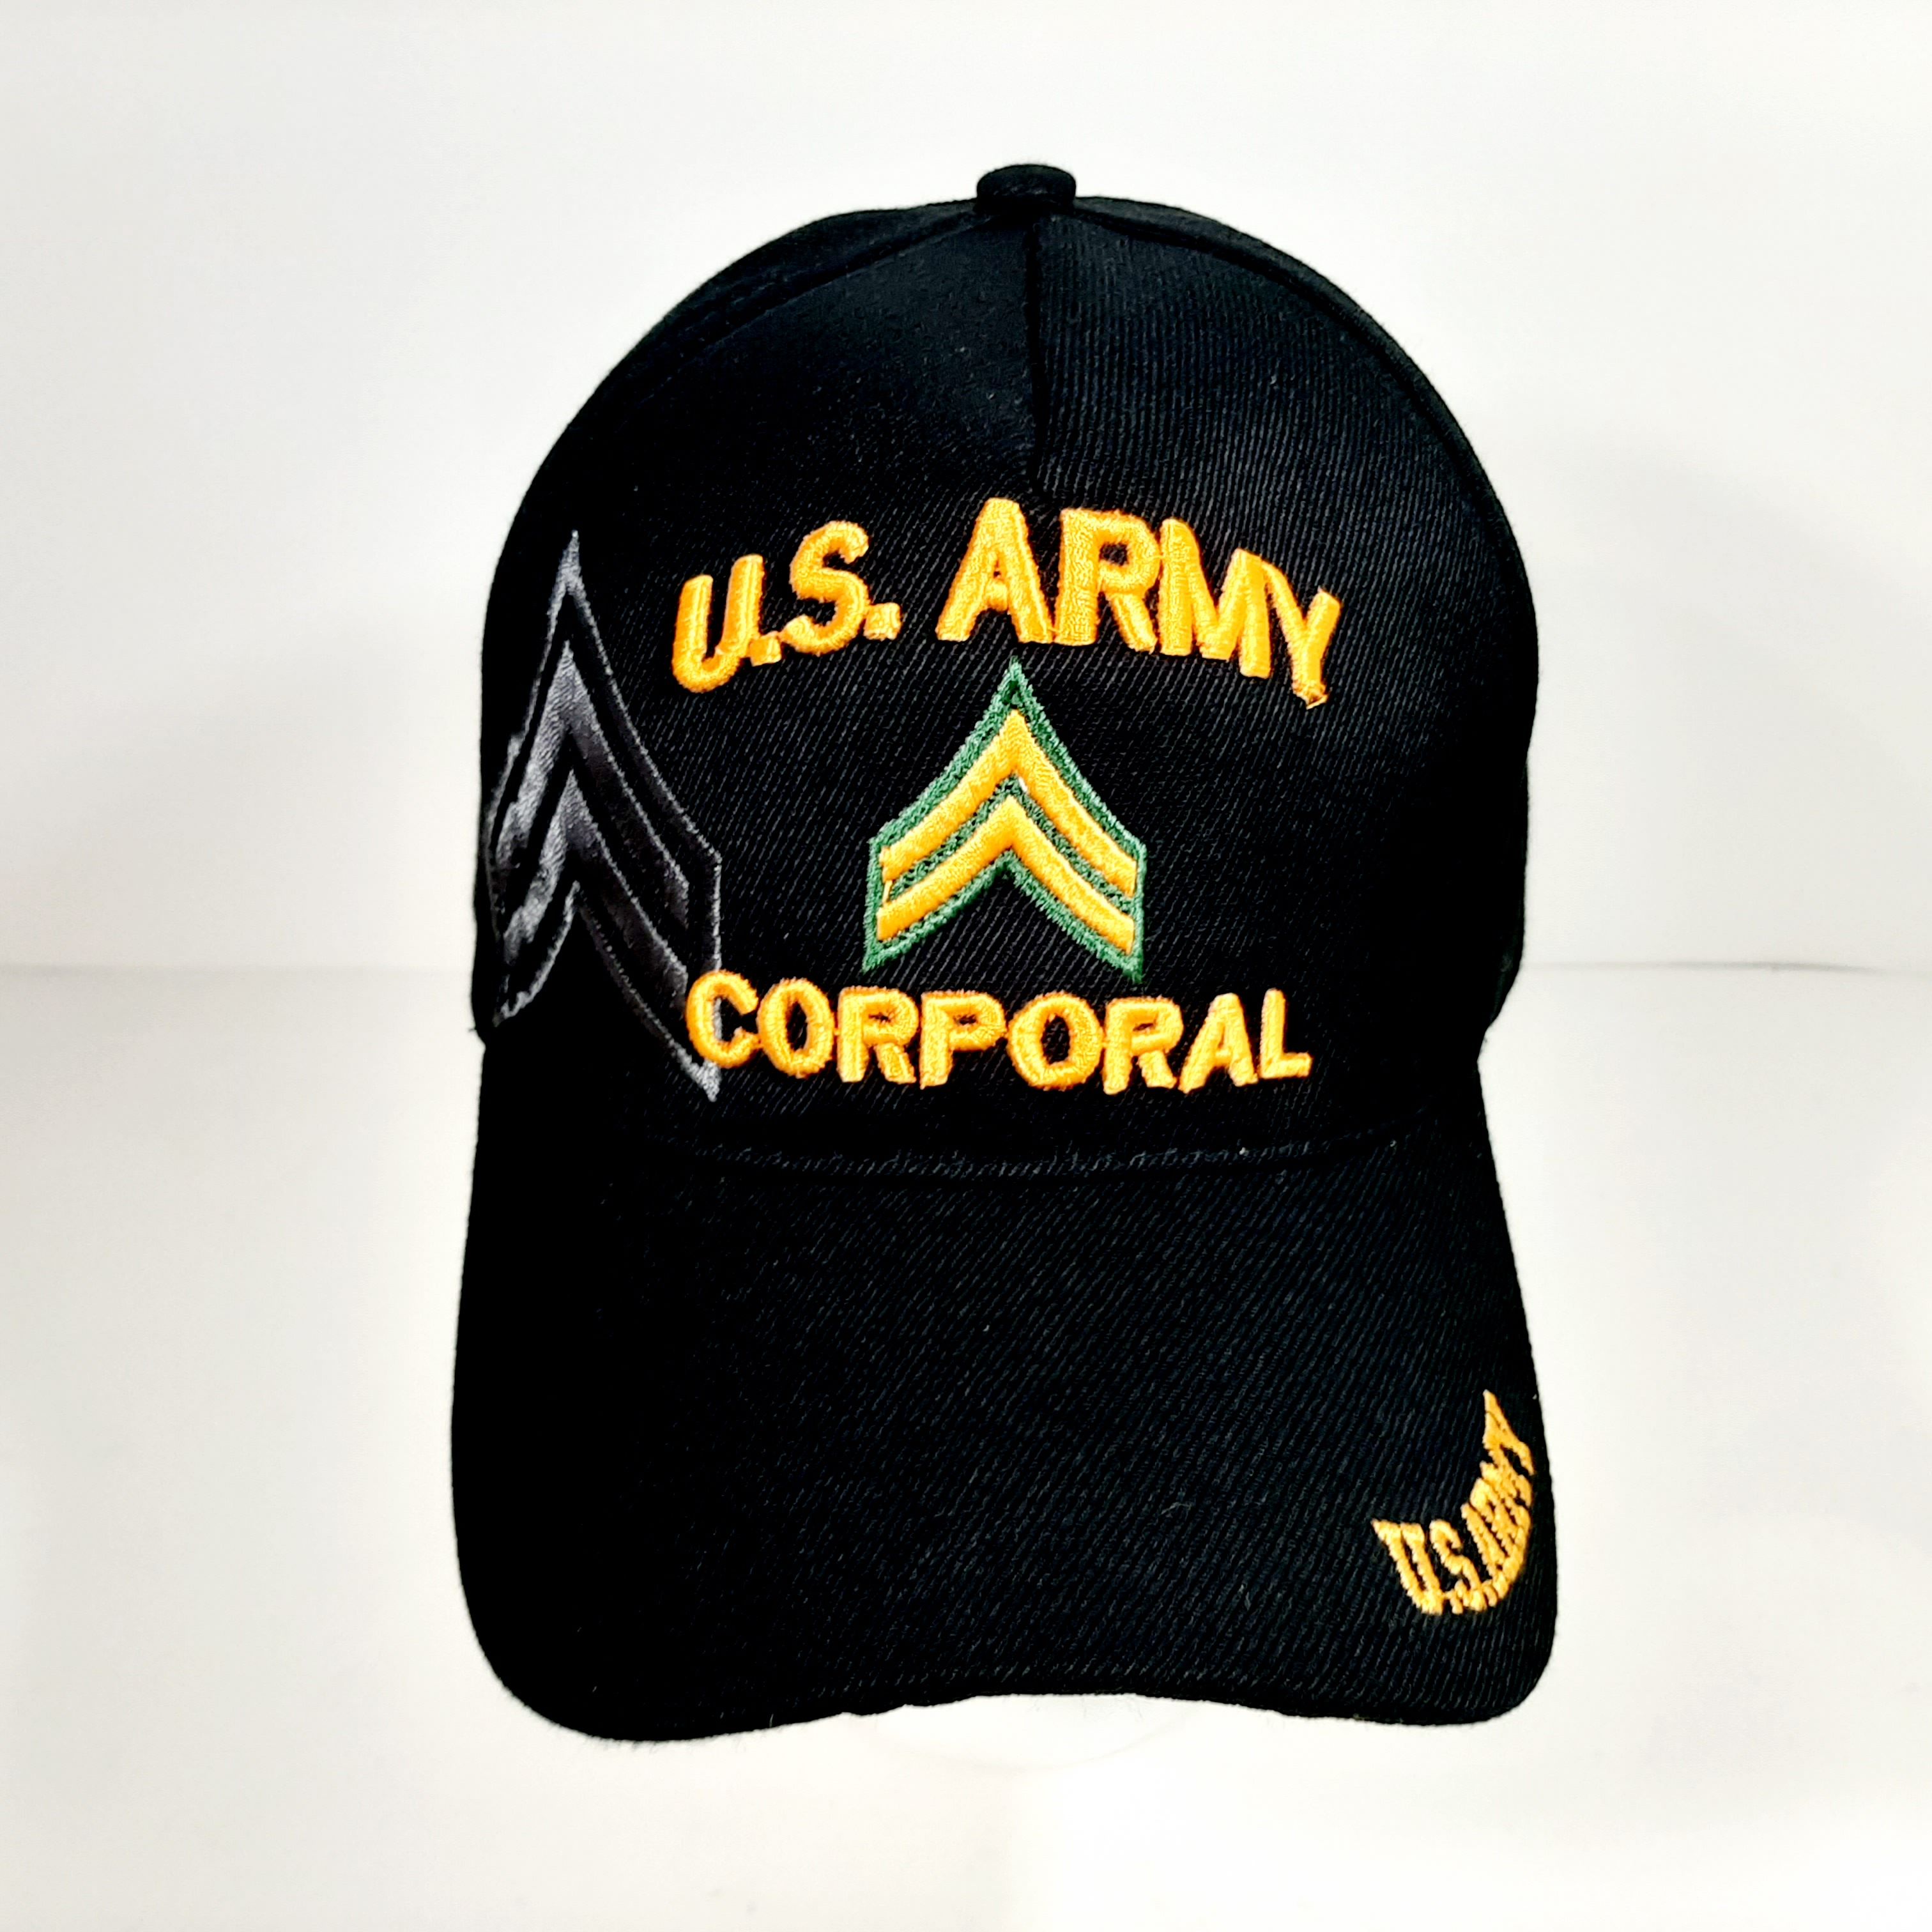 US Army Corporal Men's Ball Cap Hat Black Embroidered Acrylic H5